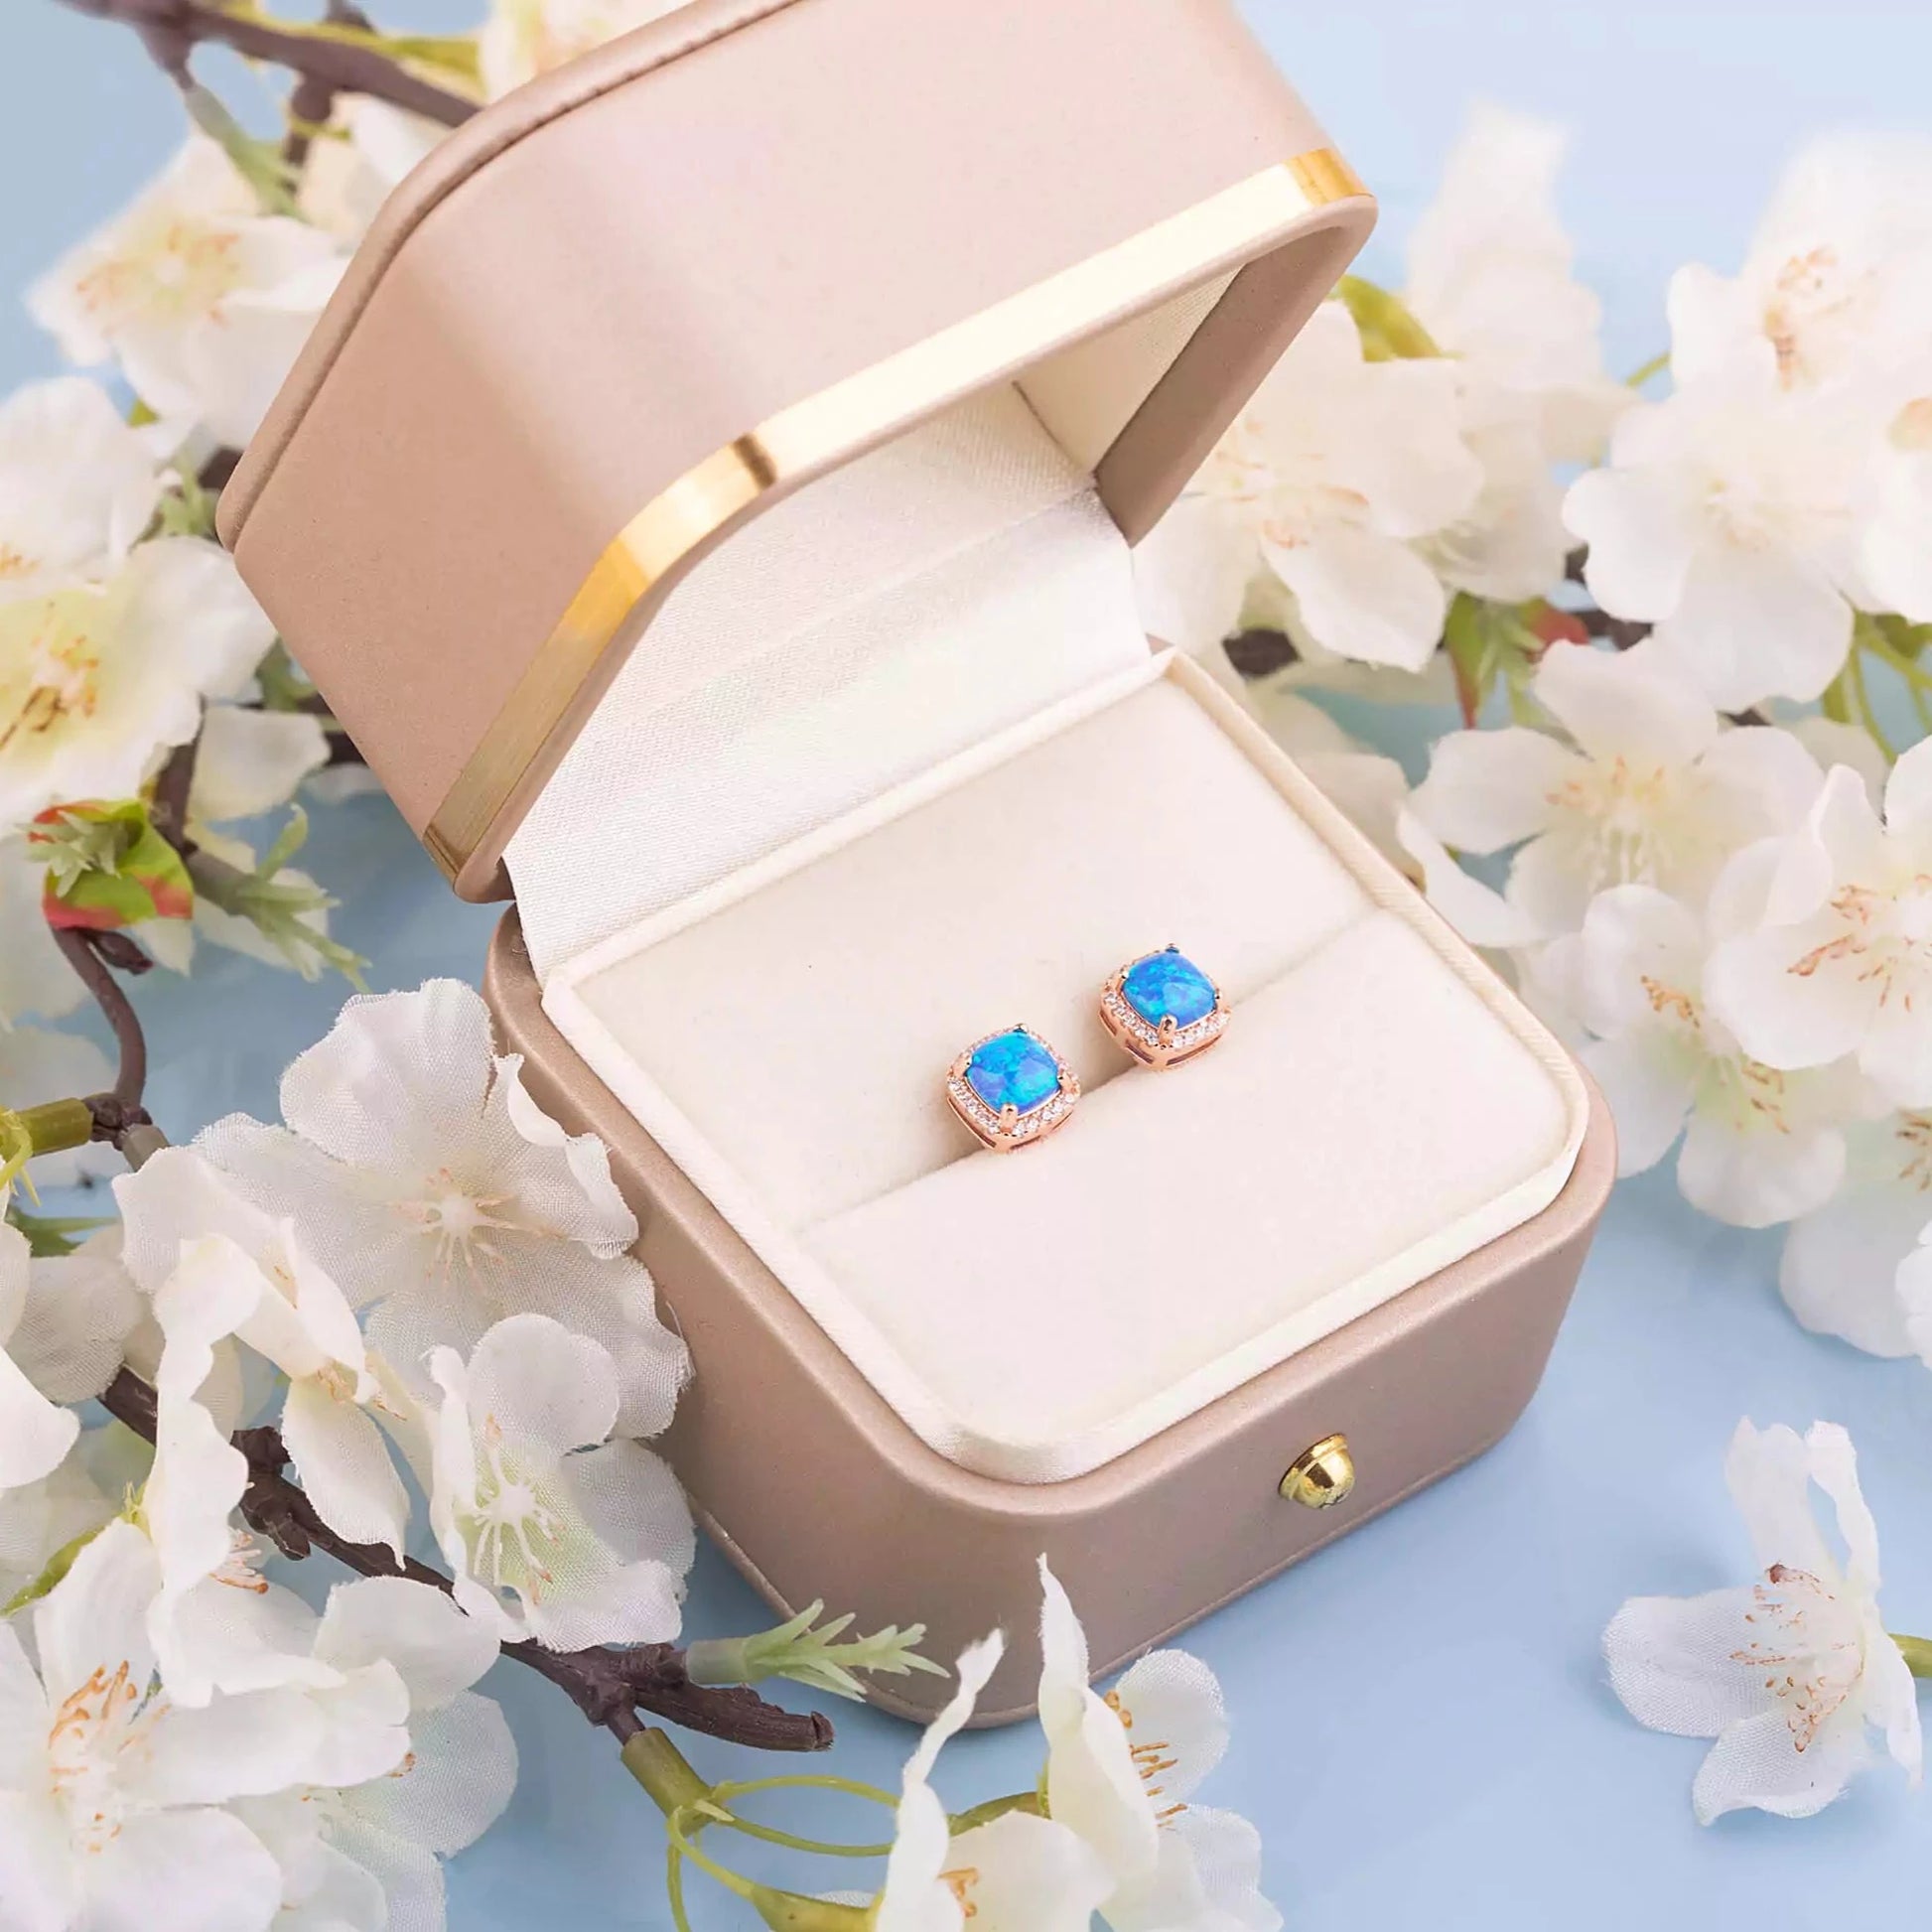 Blue Opal square studs in a gift box